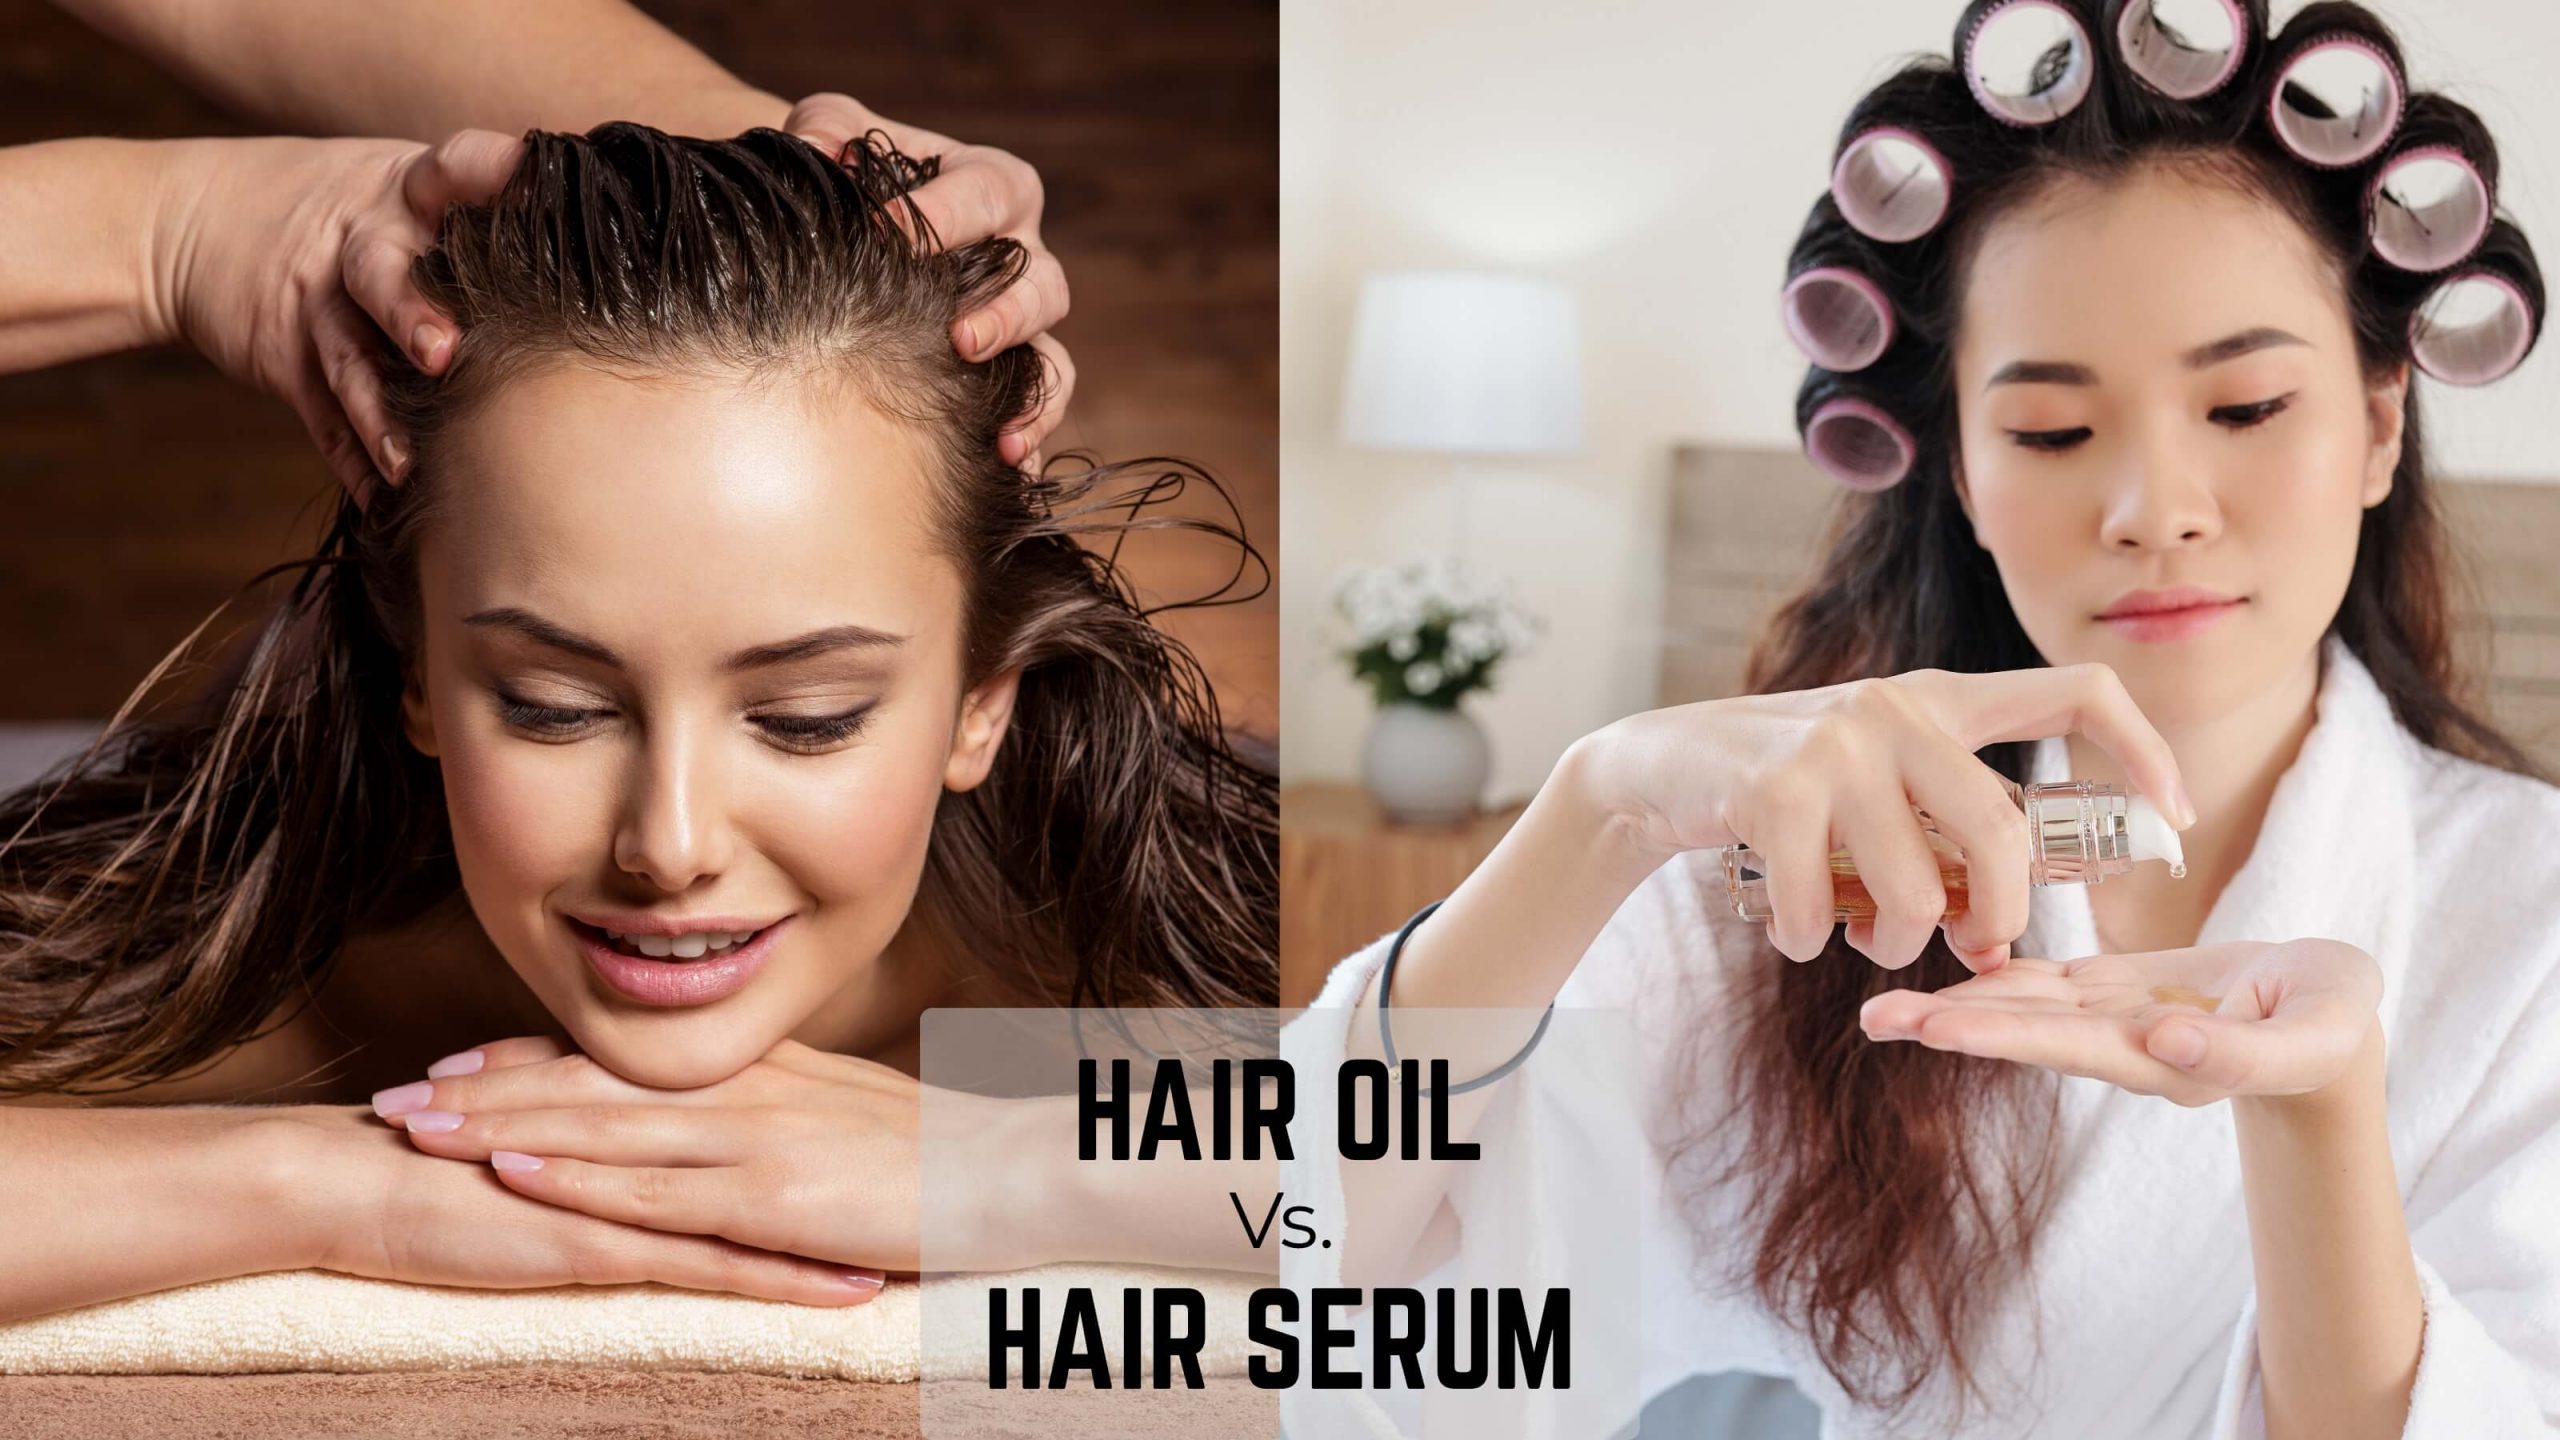 All you need to know about: Hair Serum vs. Hair Oil